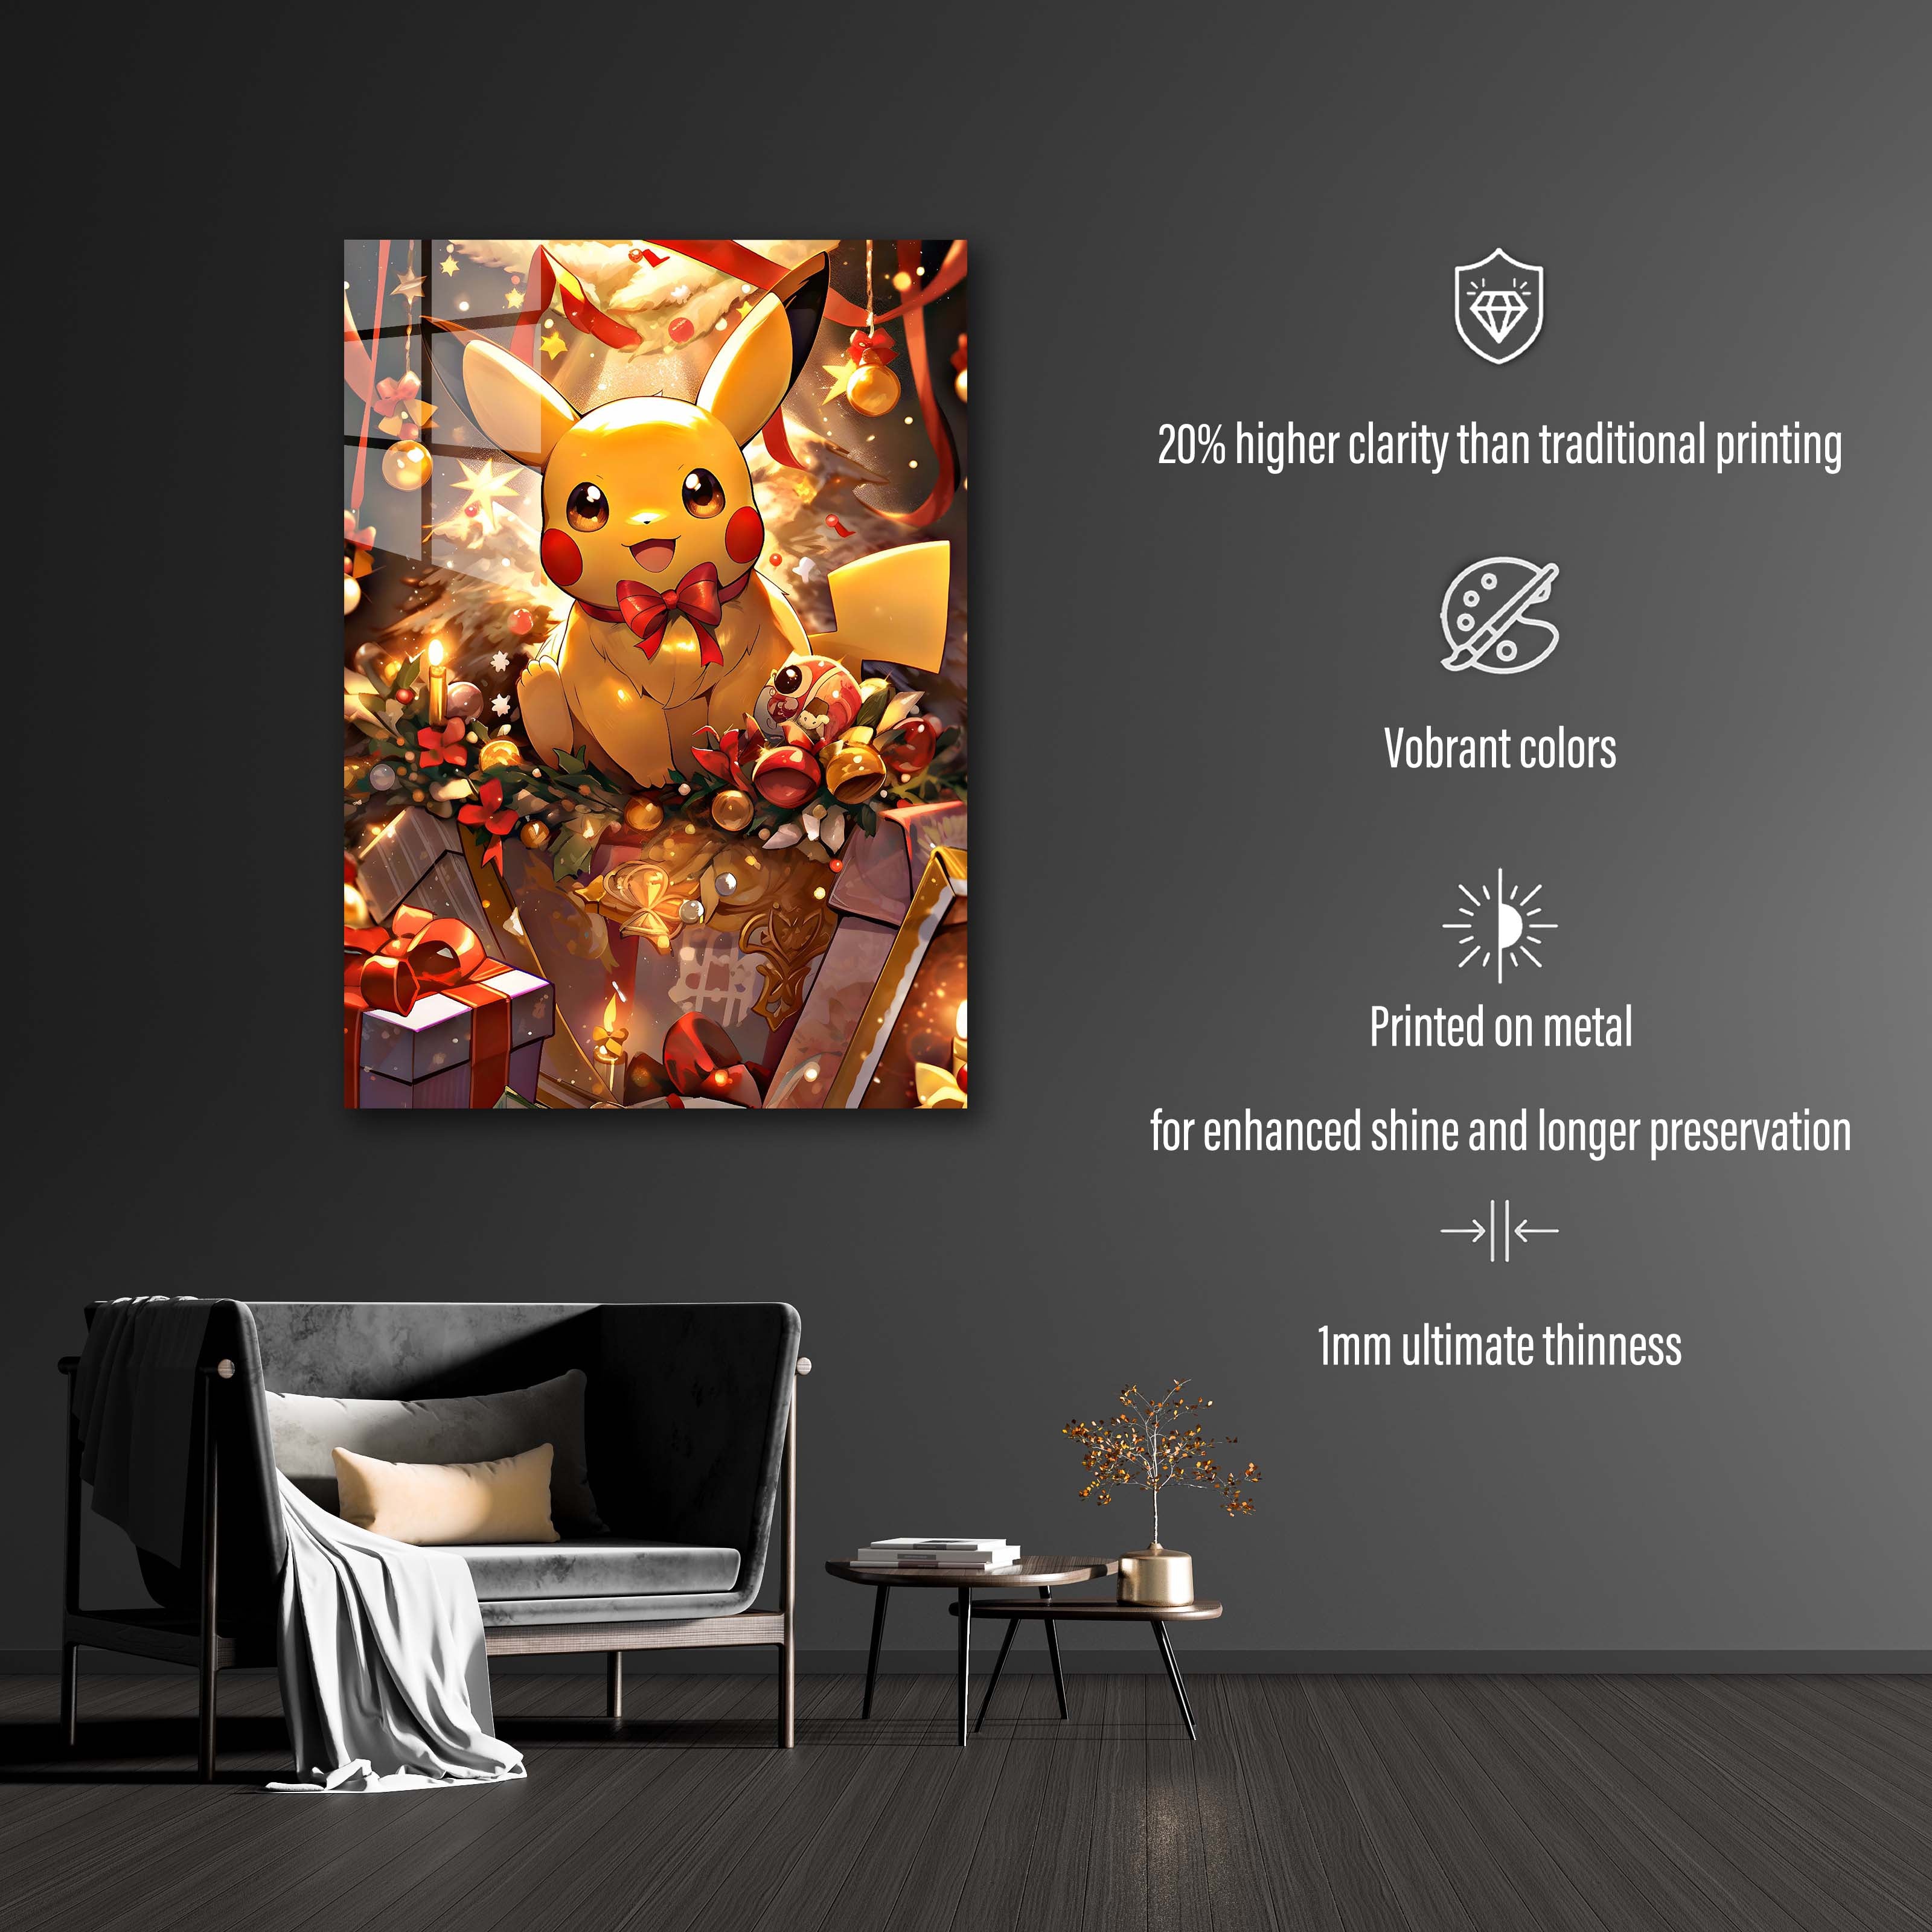 Pikachu with Chrisstmas Gifts-designed by @Blinkburst